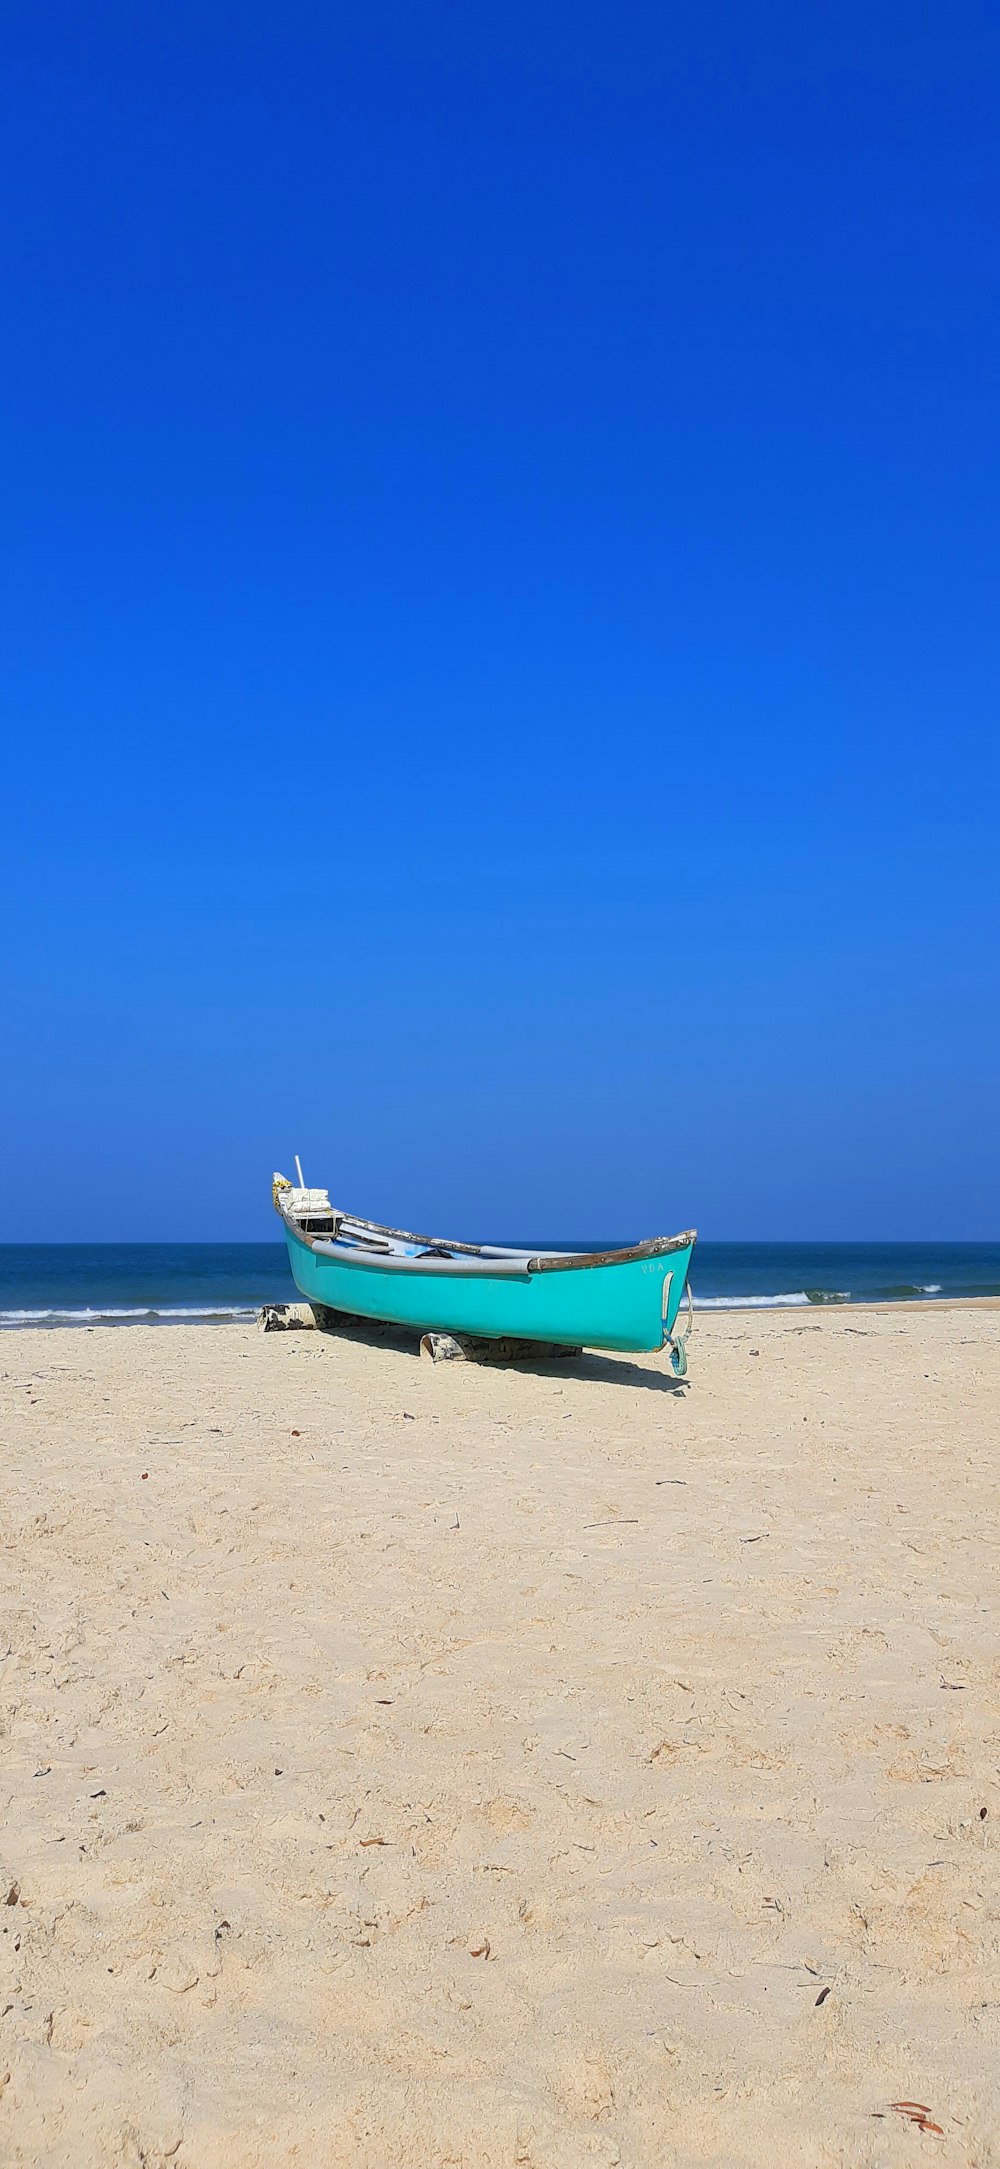 blue and white boat on beach during daytime